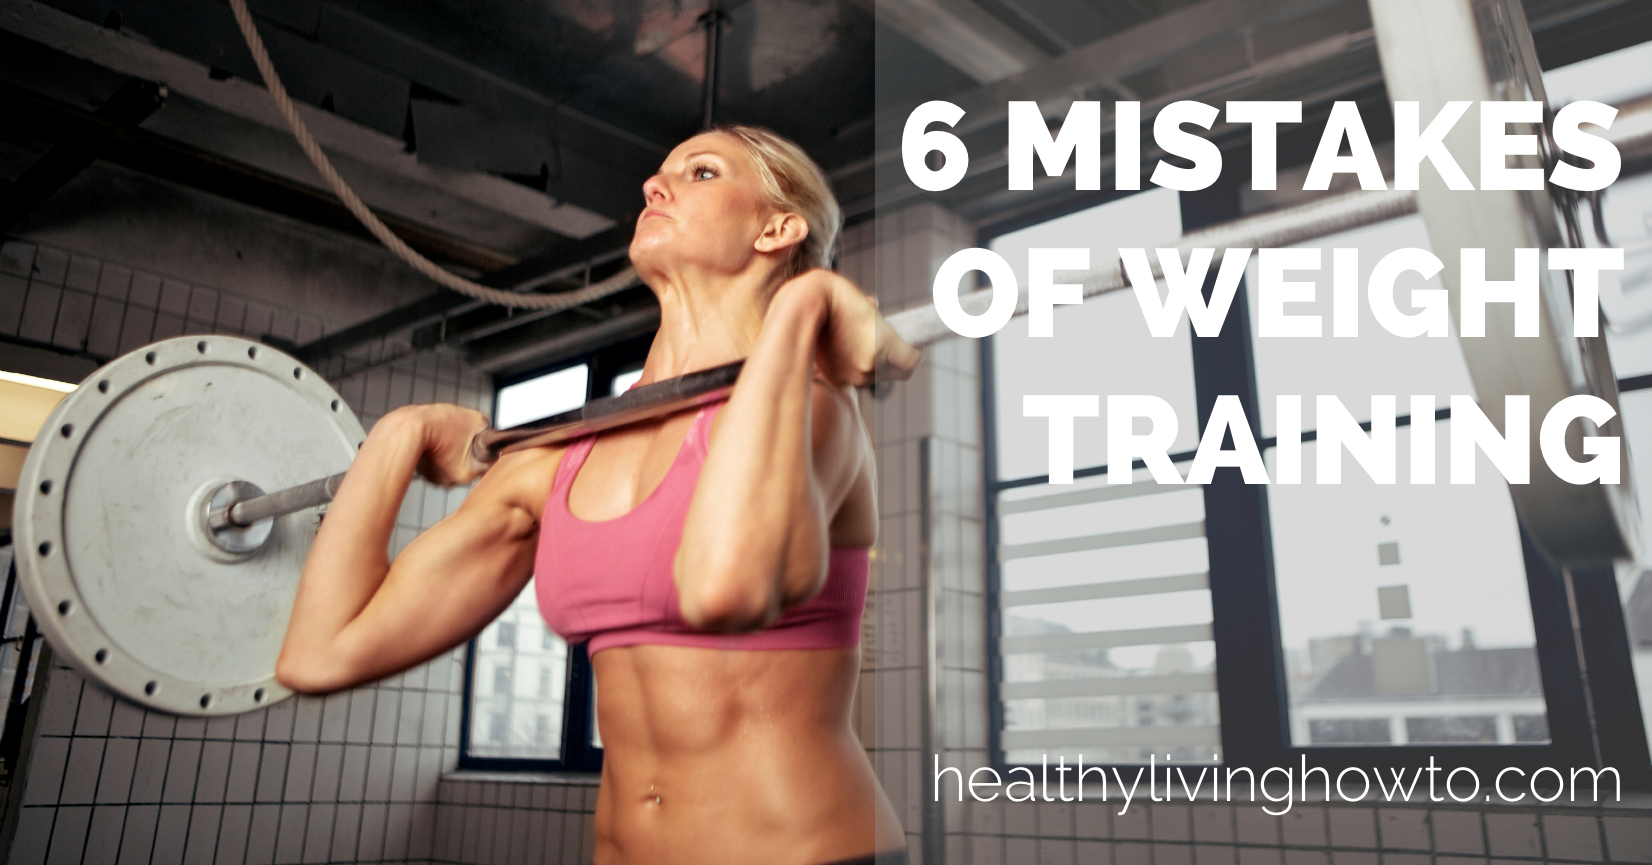 6 Mistakes of Weight Training | healthylivinghowto.com